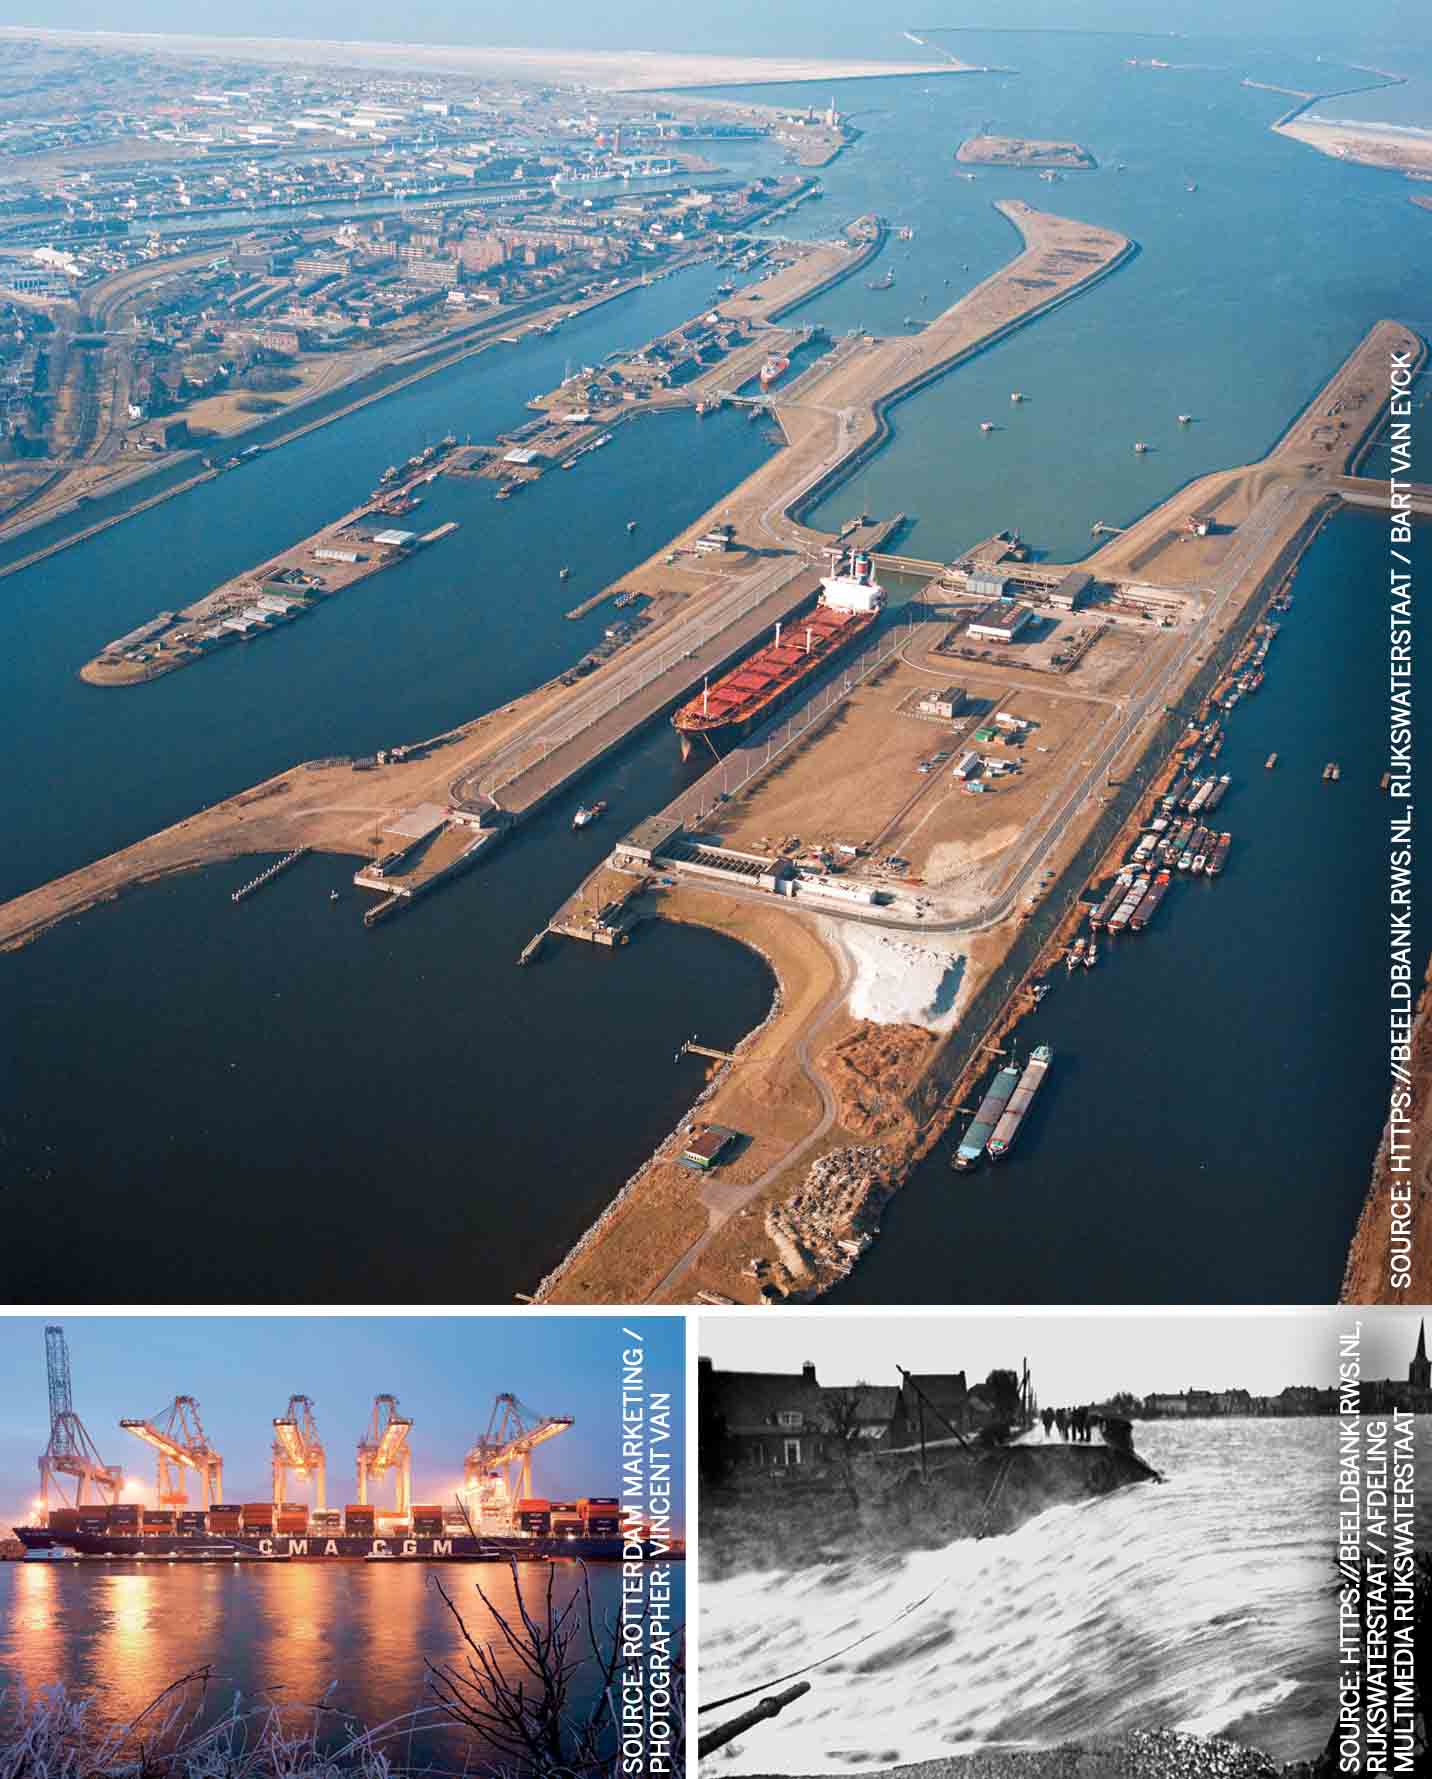 water-management-harbour-mouth-locks-ijmuiden-ship-leaves-direction-amsterdam-container-port-rotterdam-largest-industrial-complex-europe-total-cargo-traffic-430-million-tons-2010-breach-dike-ouderkerk-aan-de-ijssel